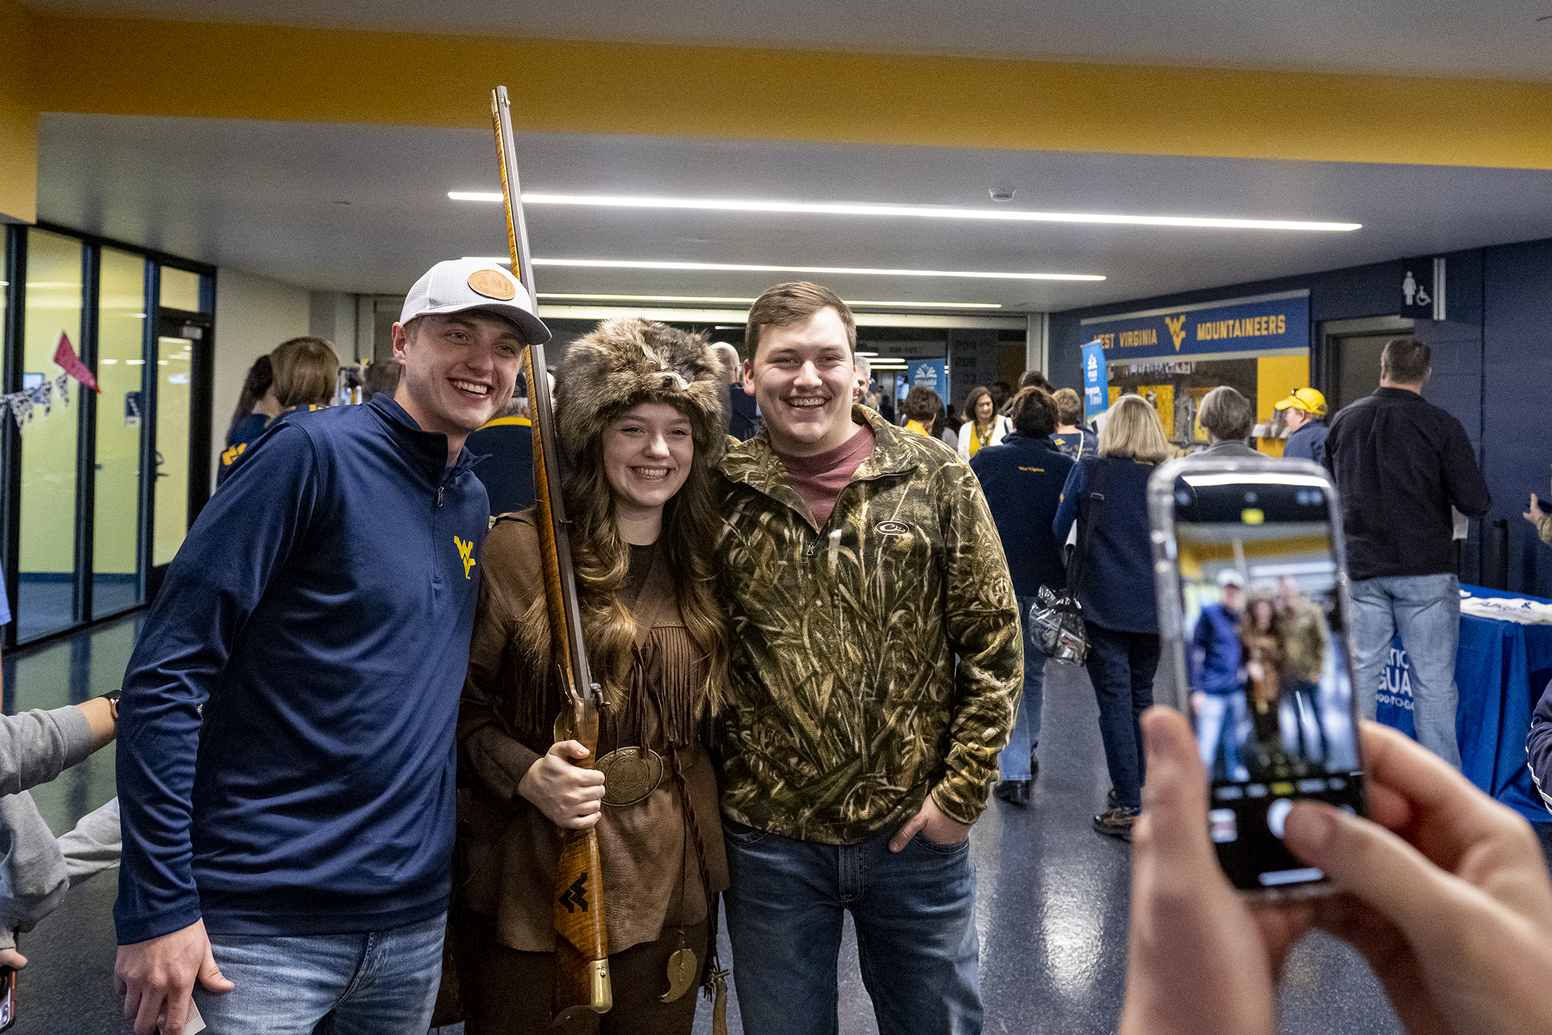 two young men flank woman in buckskins holding rifle, hands hold a cell phone taking a photo in the foreground